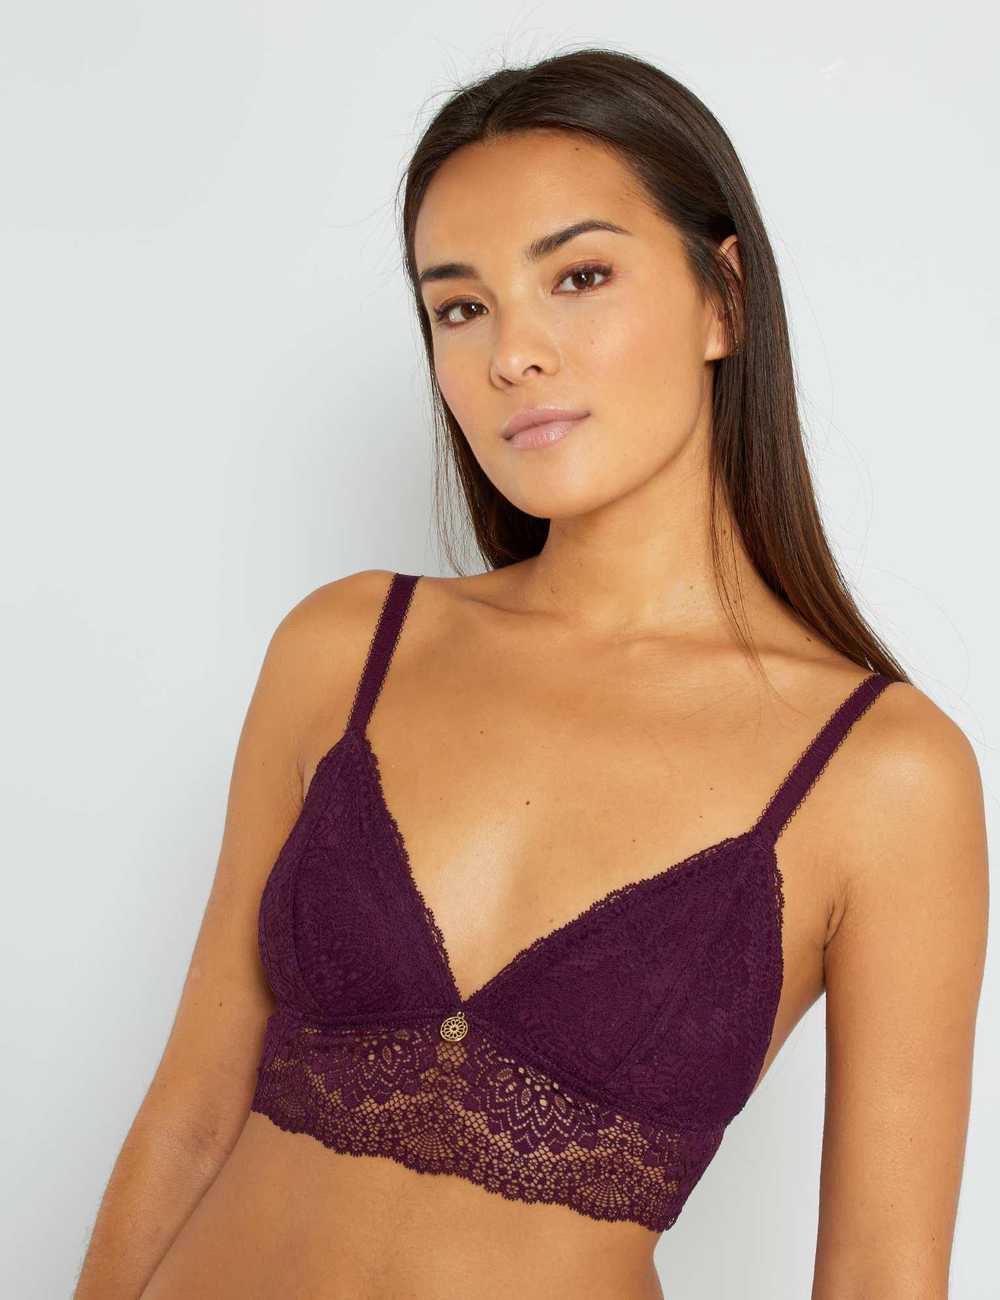 Buy Padded lace triangle bra Online in Dubai & the UAE